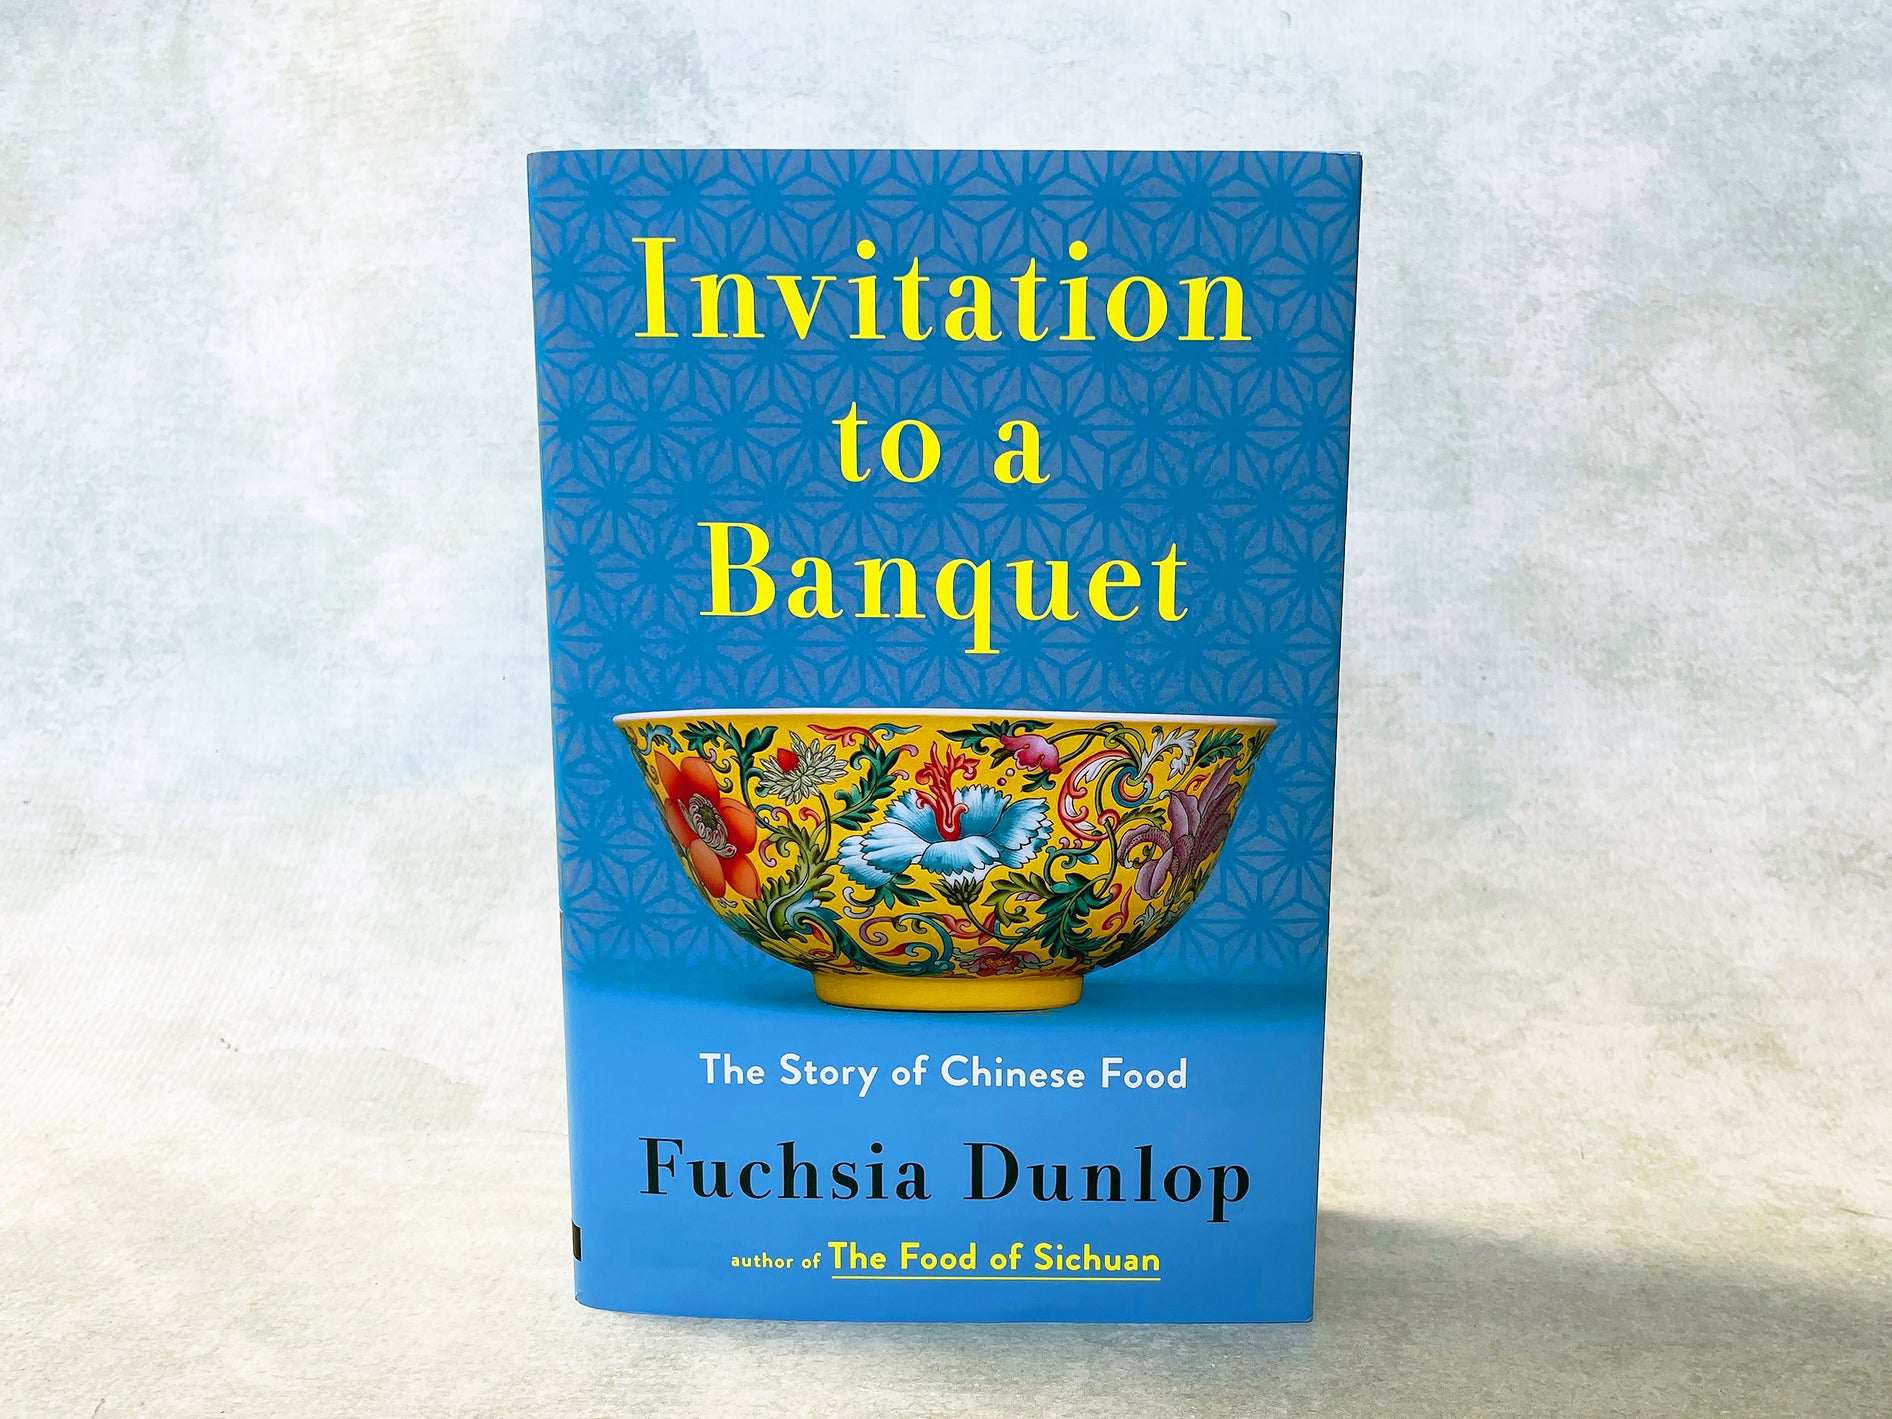 Invitation to a Banquet: The Story of Chinese Food (By Fuchsia Dunlop) *Signed by the Author*